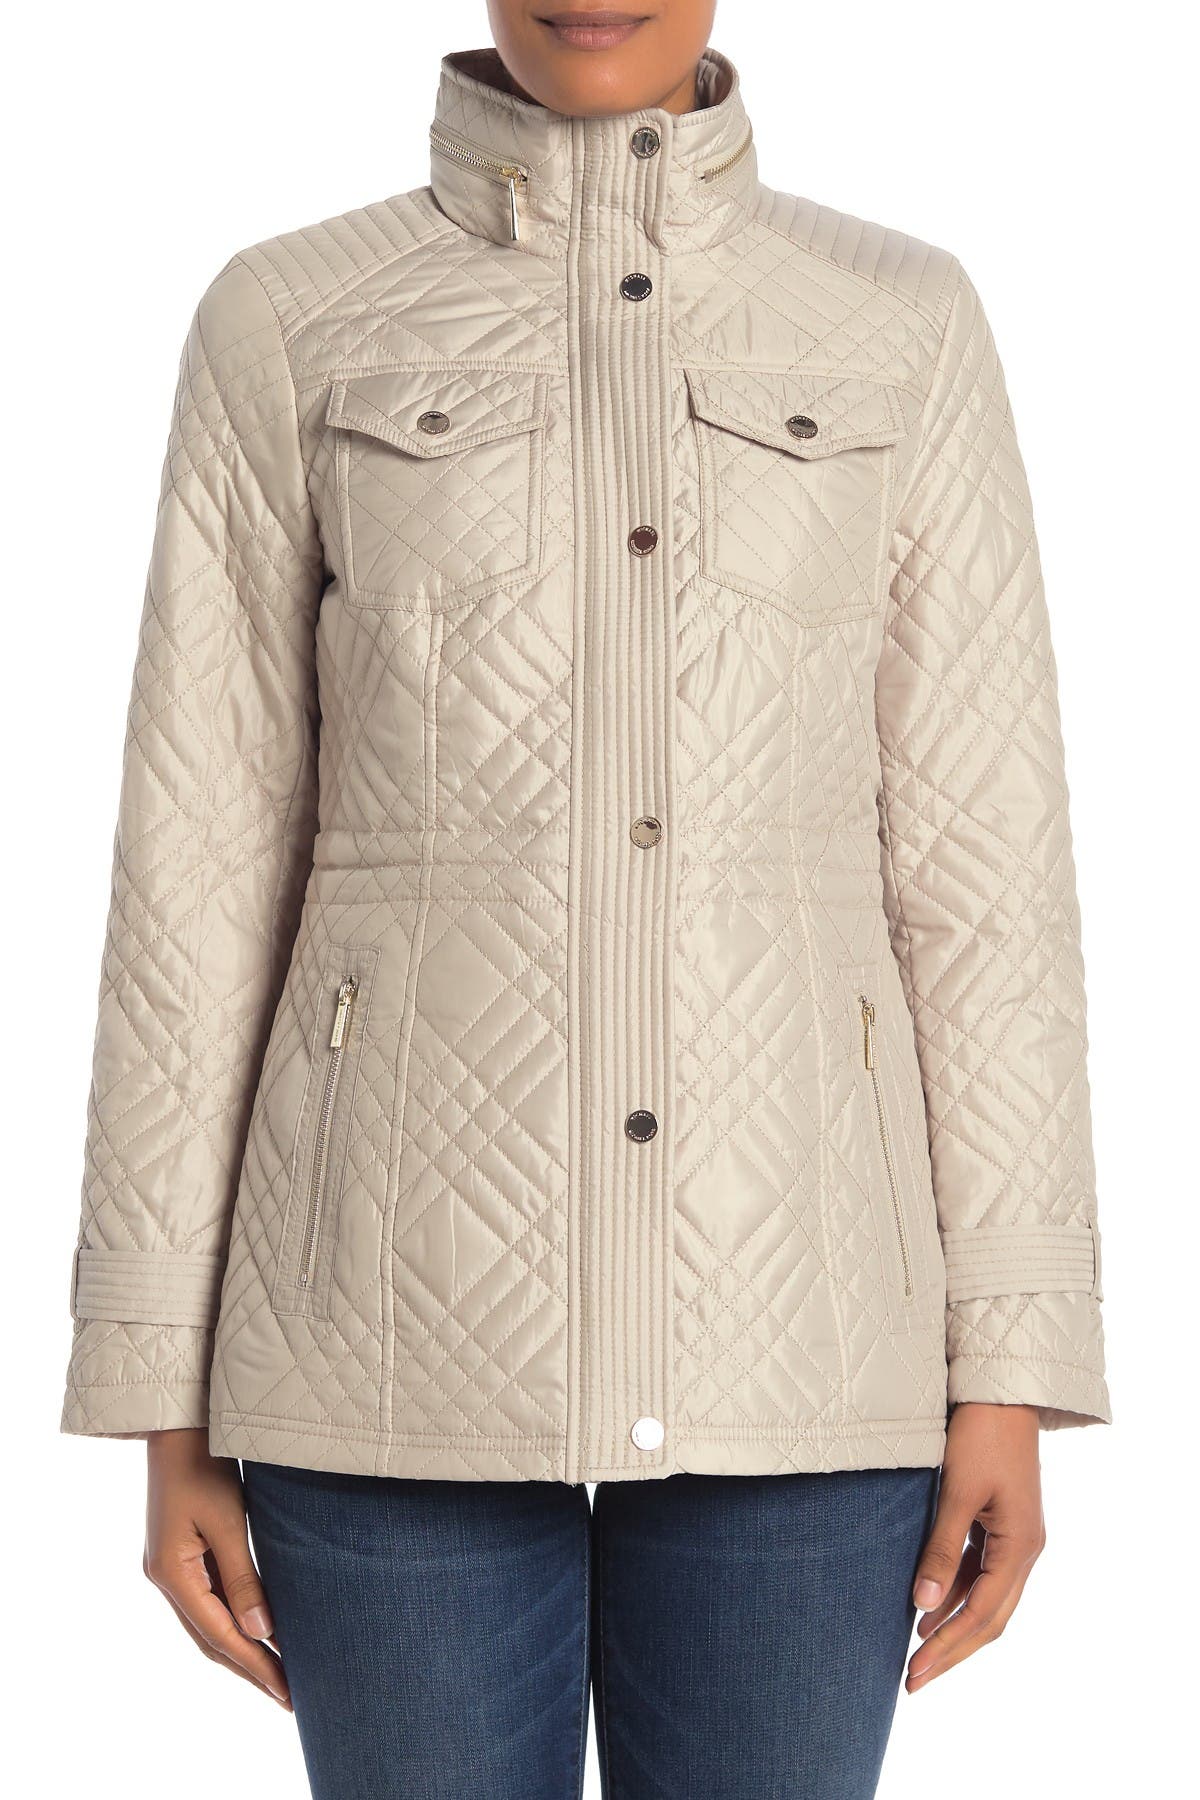 michael michael kors missy quilted anorak